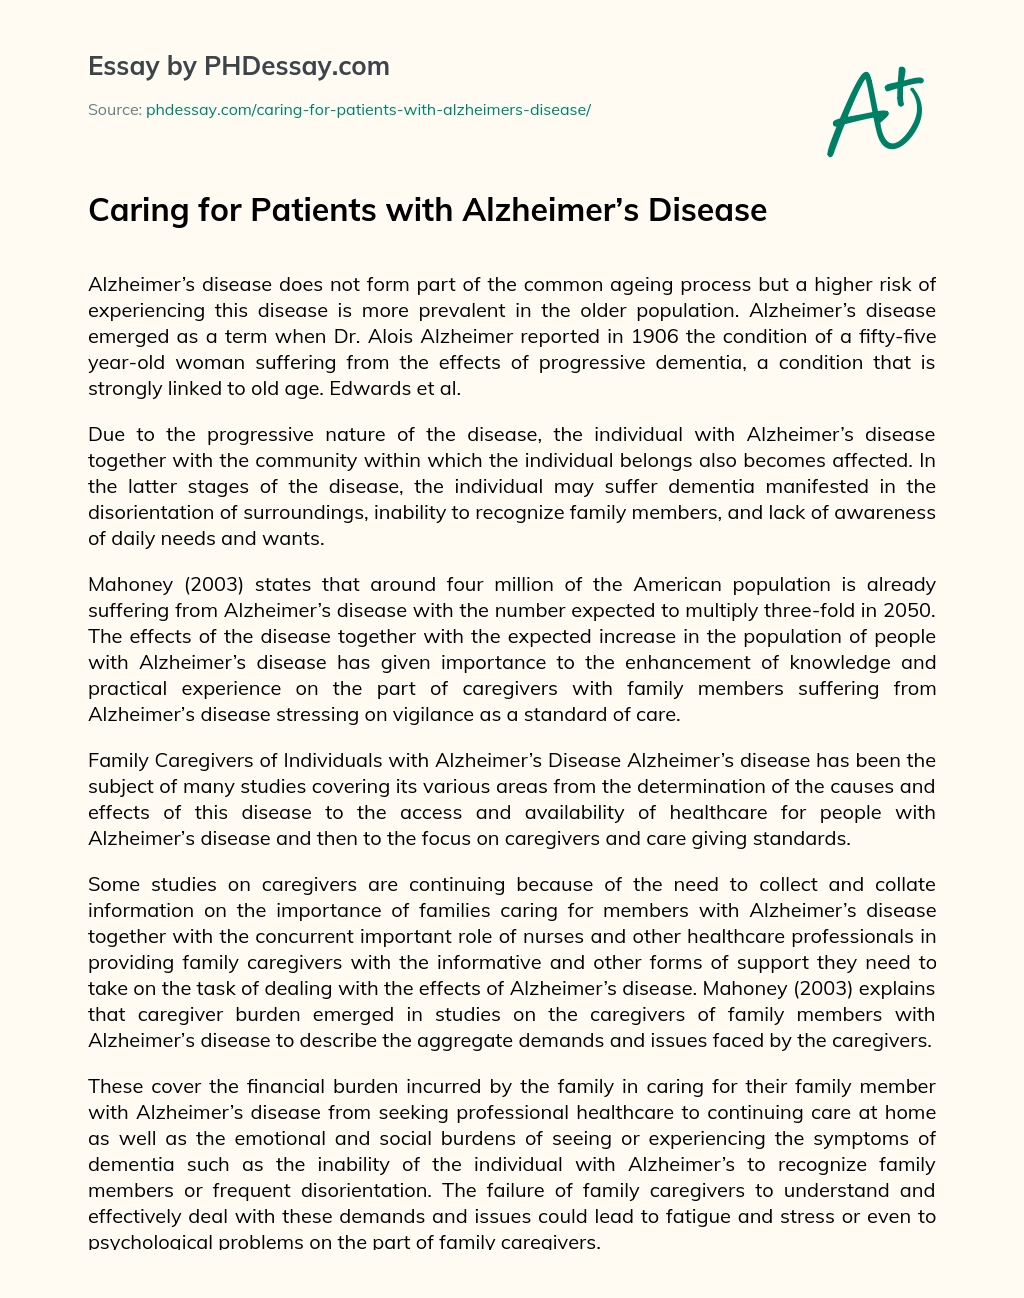 Caring for Patients with Alzheimer’s Disease essay